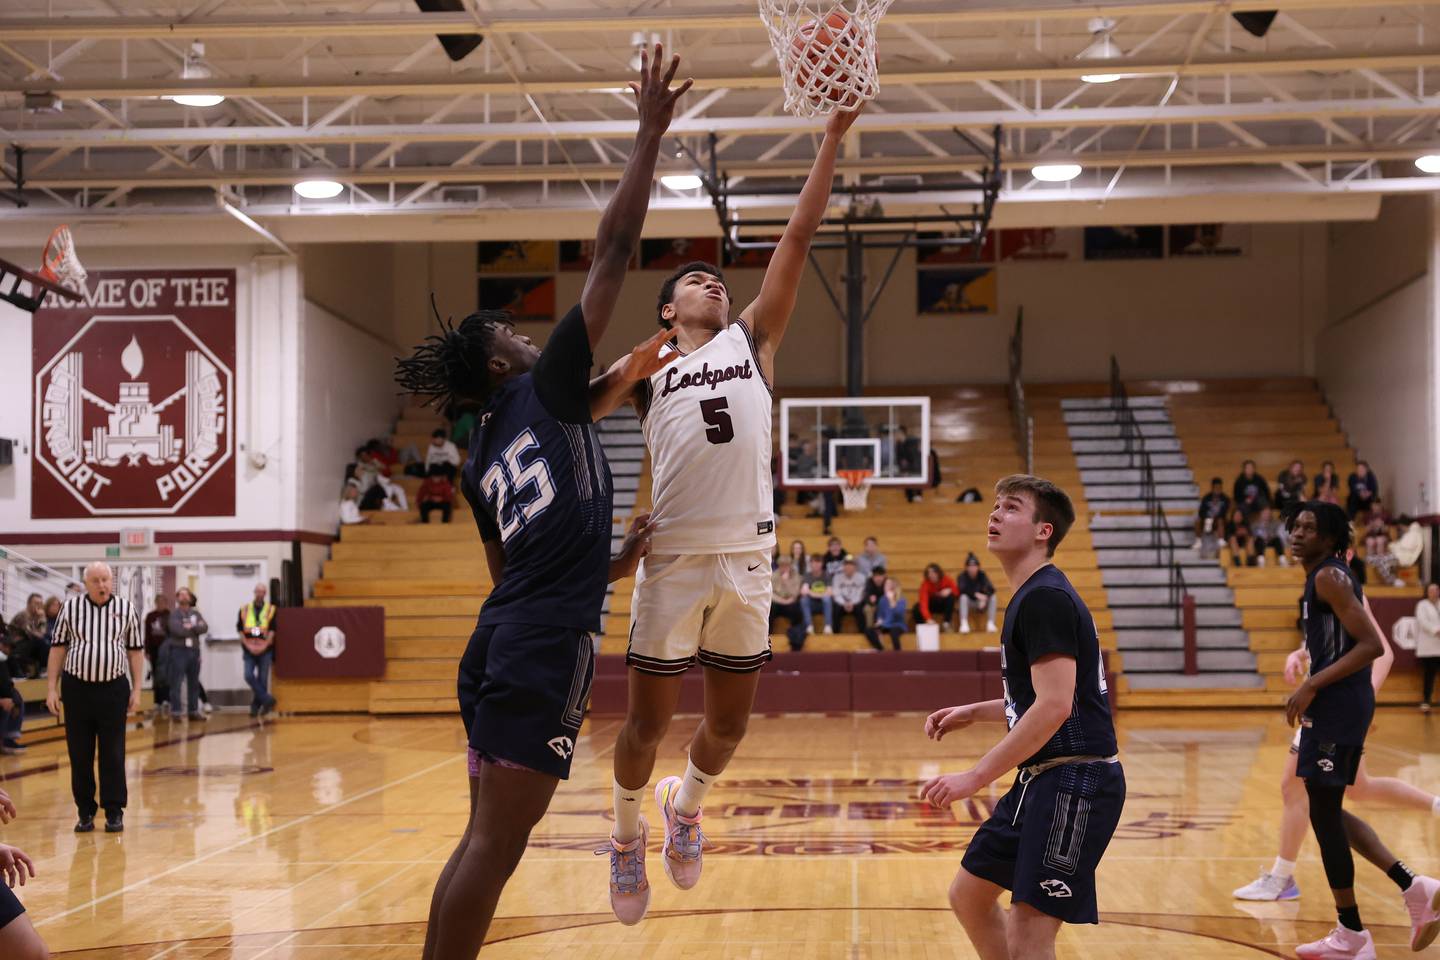 Lockport’s Quinton Hunter lays in a shot against Plainfield South on Wednesday January 25th, 2023.